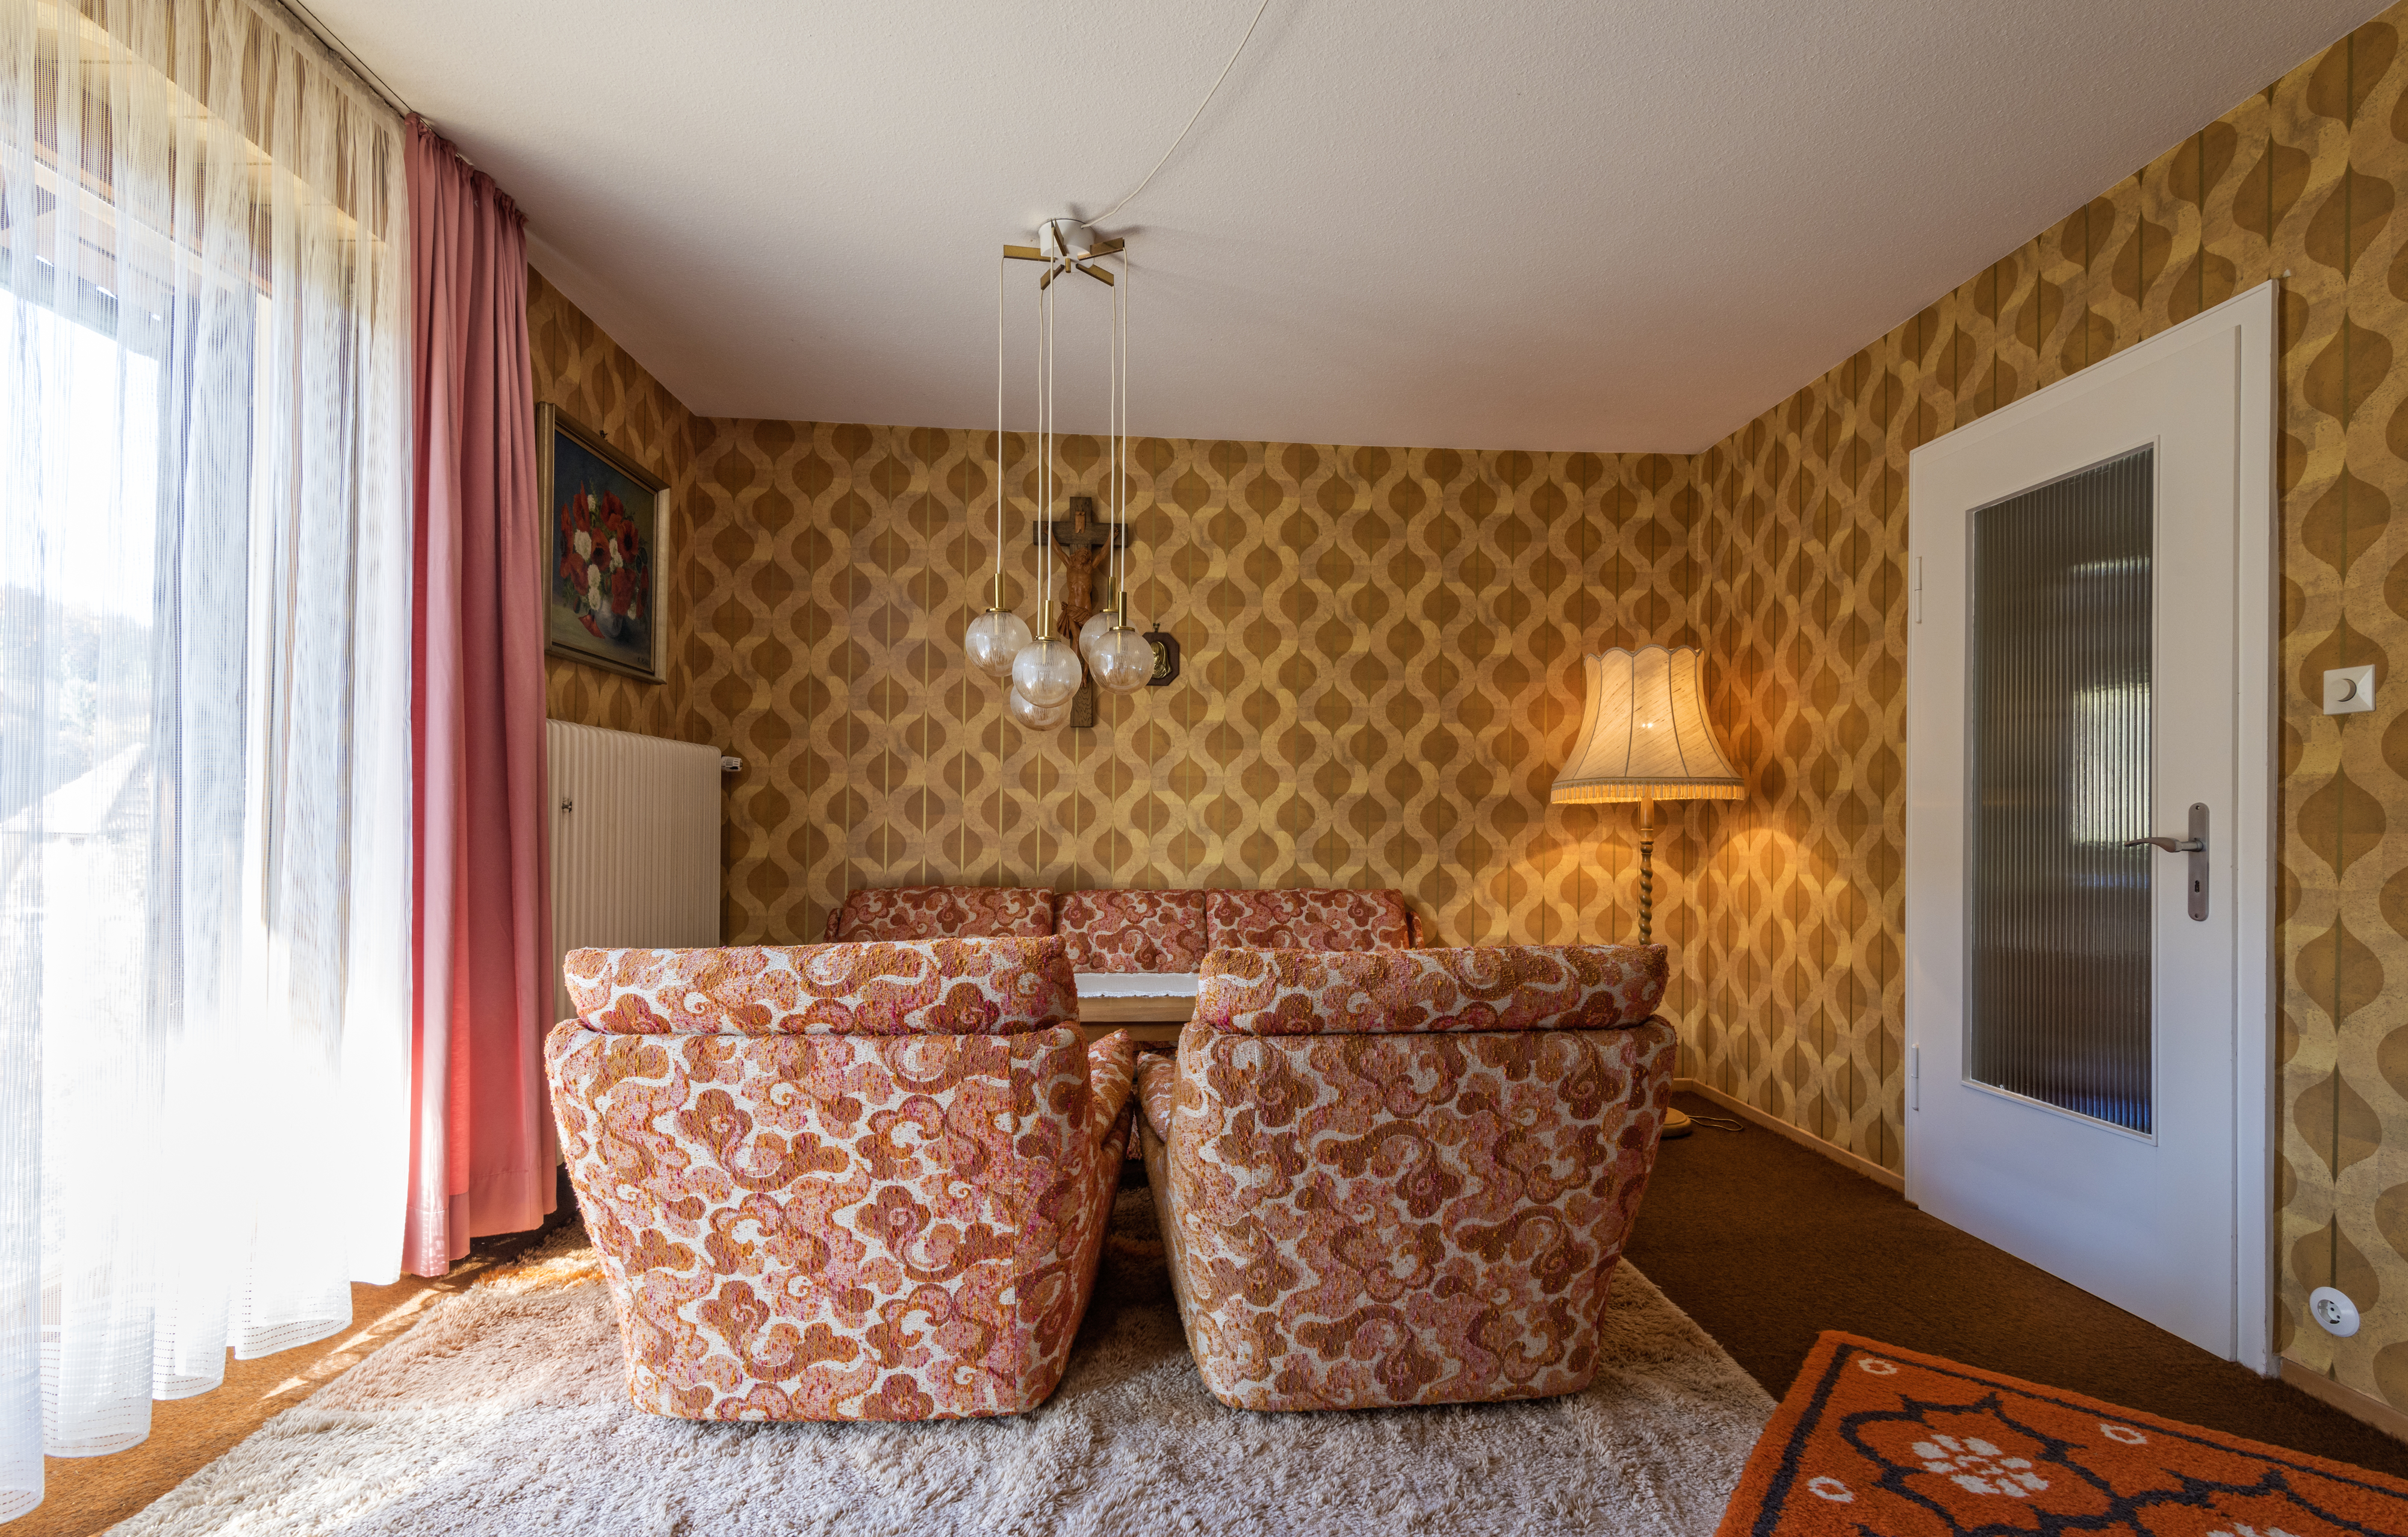 A room with &#x27;70s style furniture and wallpaper